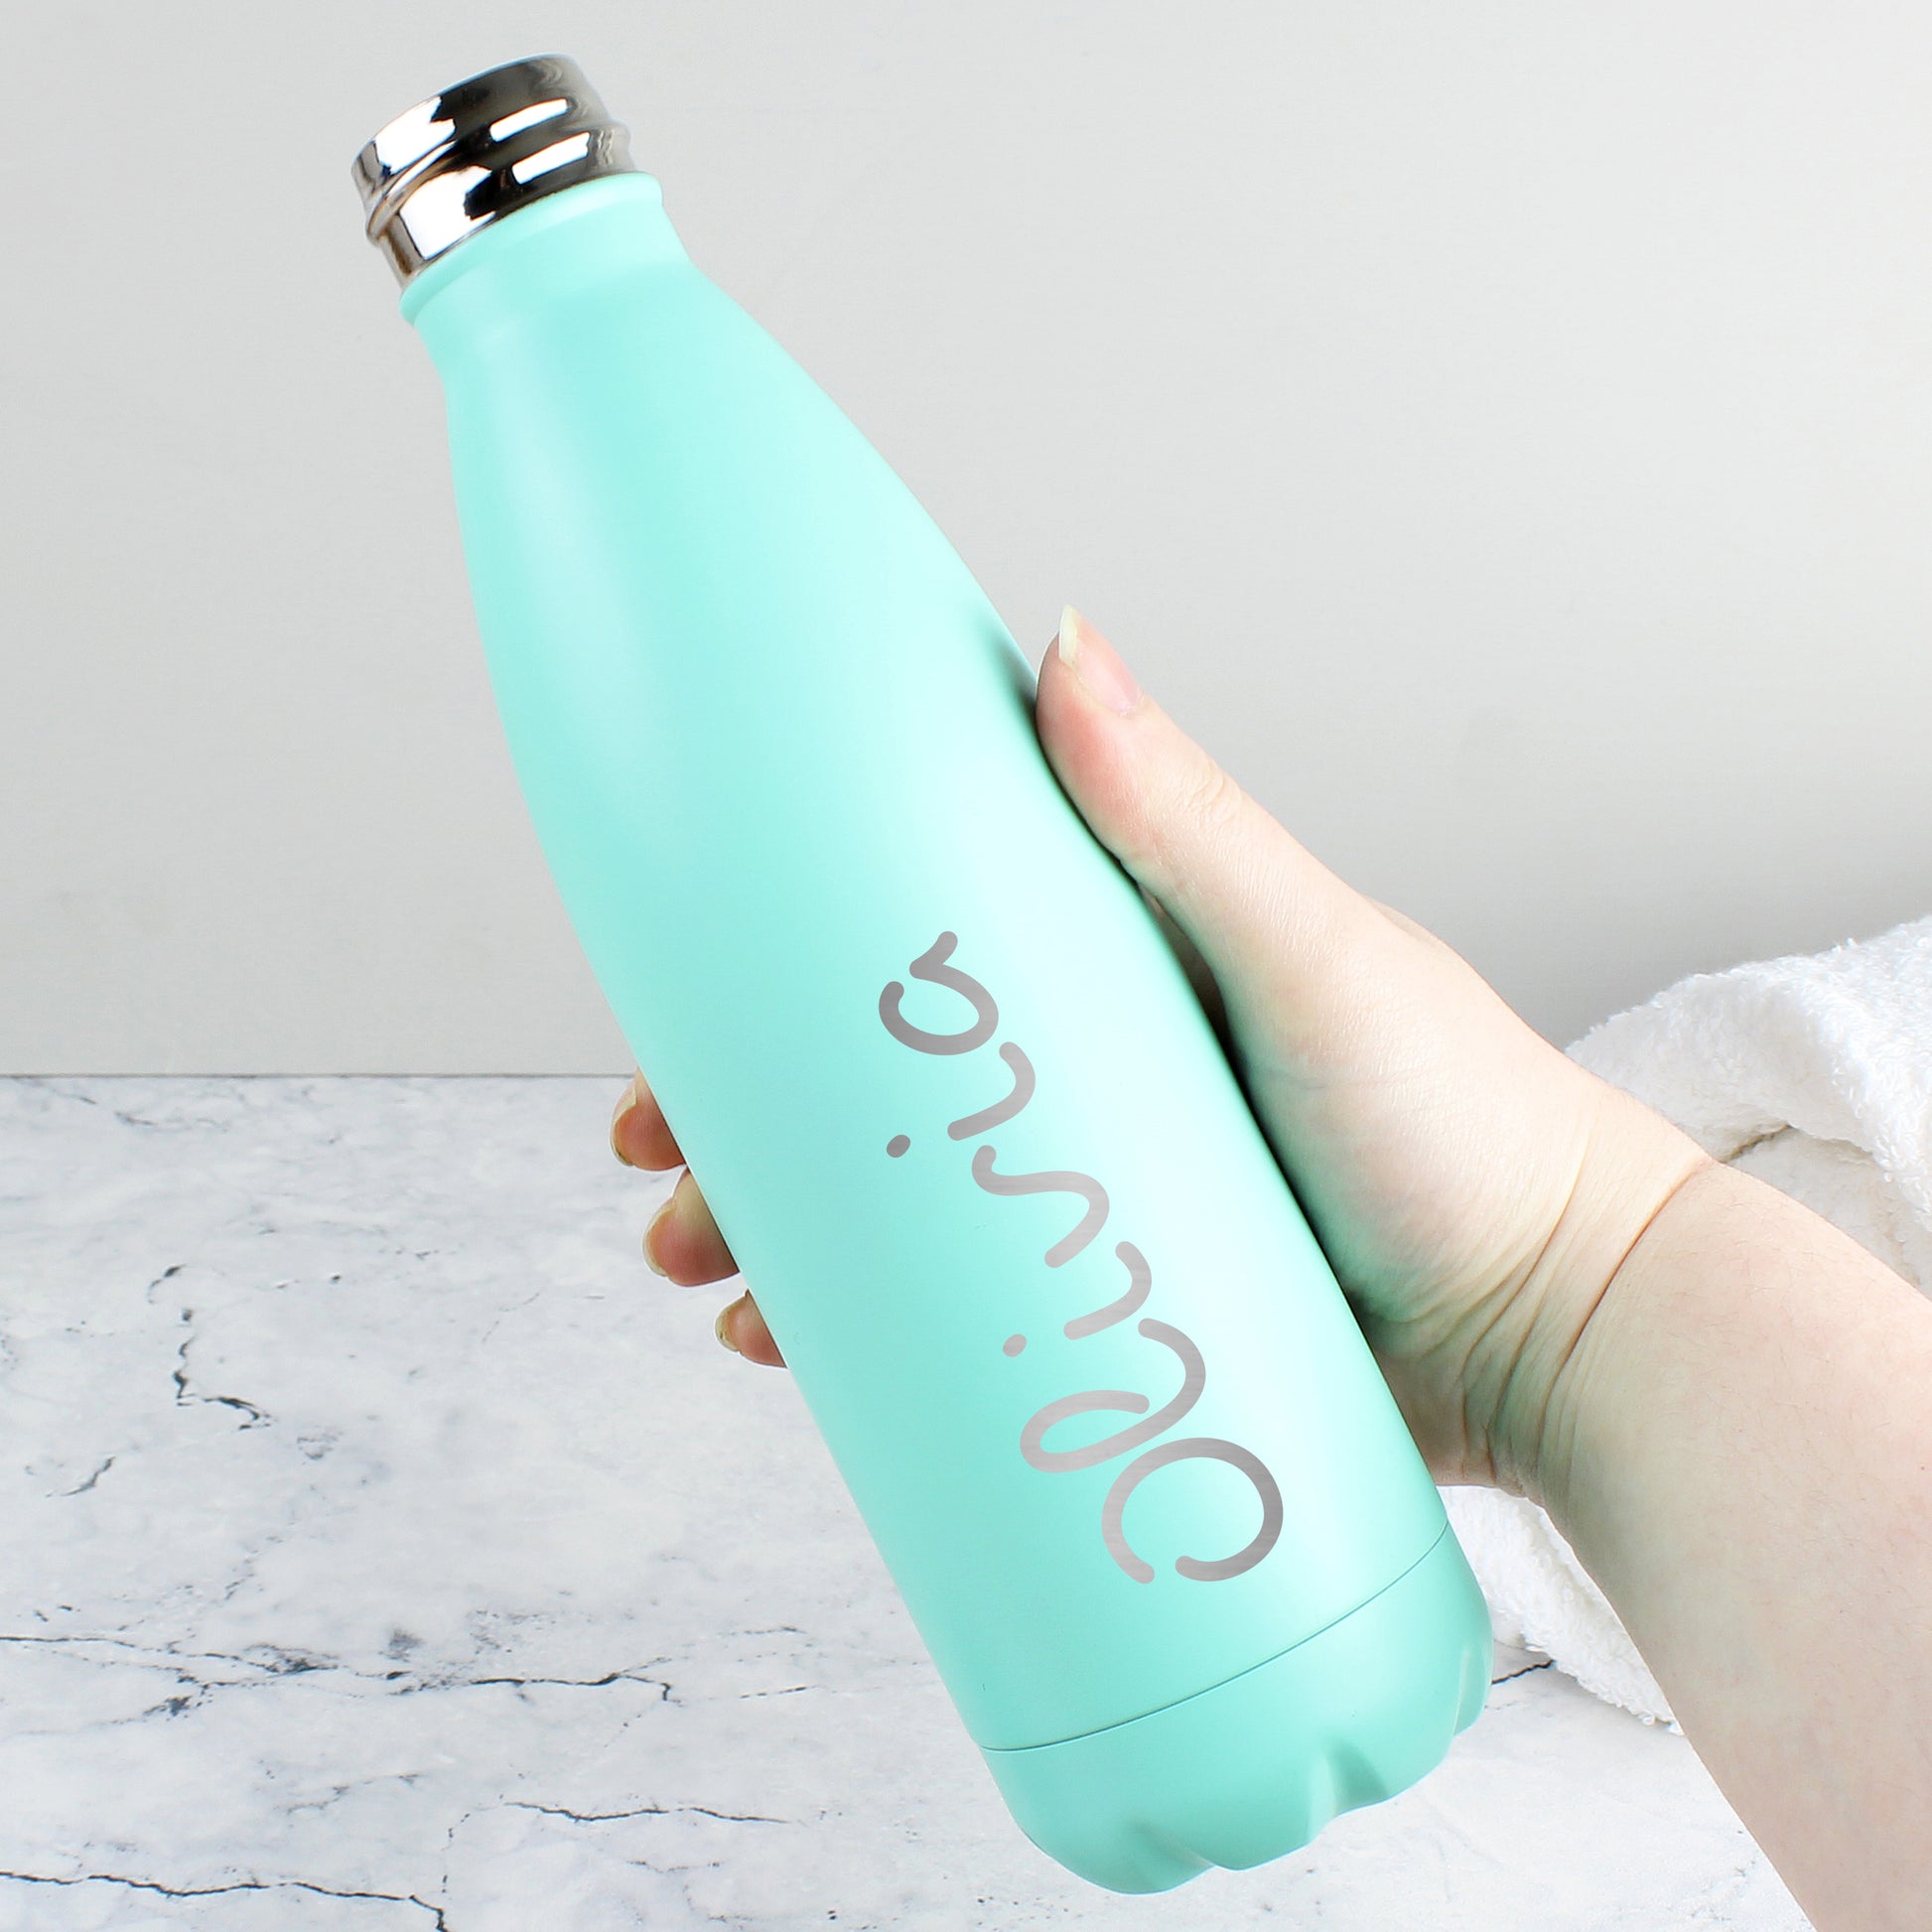 Pale blue insulated Island themed drinks bottle - Lilybet loves